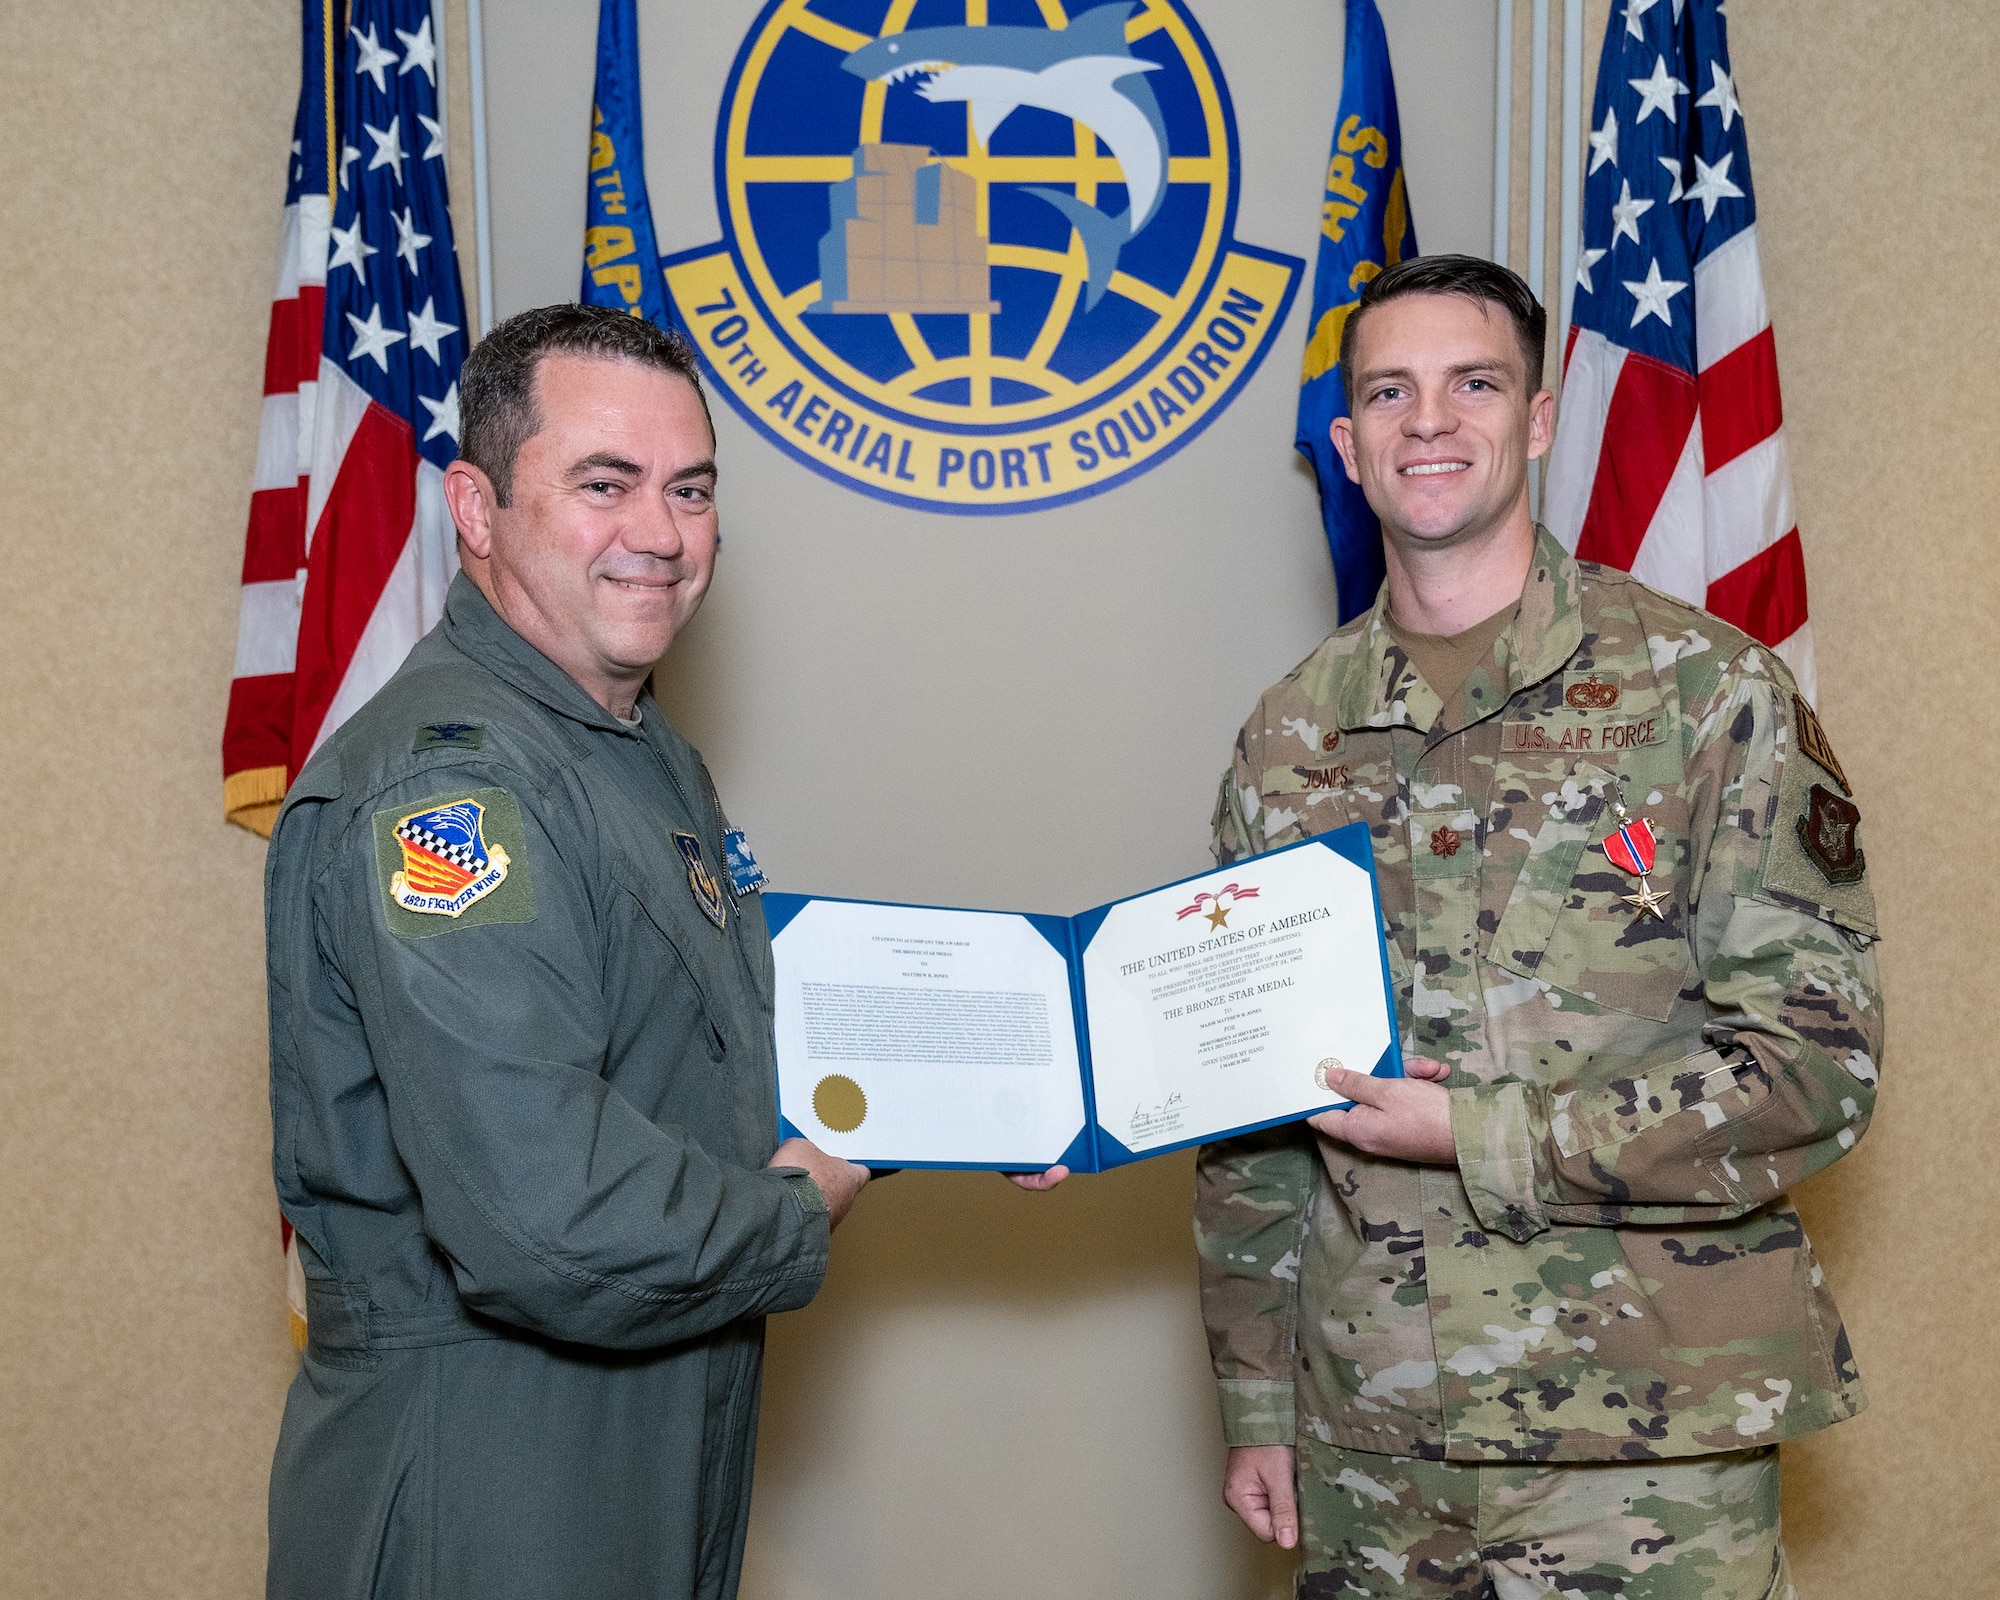 Maj. Matthew R. Jones, 70th Aerial Port Squadron Commander, was awarded the Bronze Star Medal by Col. S. James Frickel, 482nd Fighter Wing Vice Commander, for meritorious achievement at Homestead Air Reserve Base, Florida, August 6, 2022. The Bronze Star Medal, awarded to military members since 1944, is the fourth highest achievable medal. (U.S. Air Force photo by Tech. Sgt. Lionel Castellano)